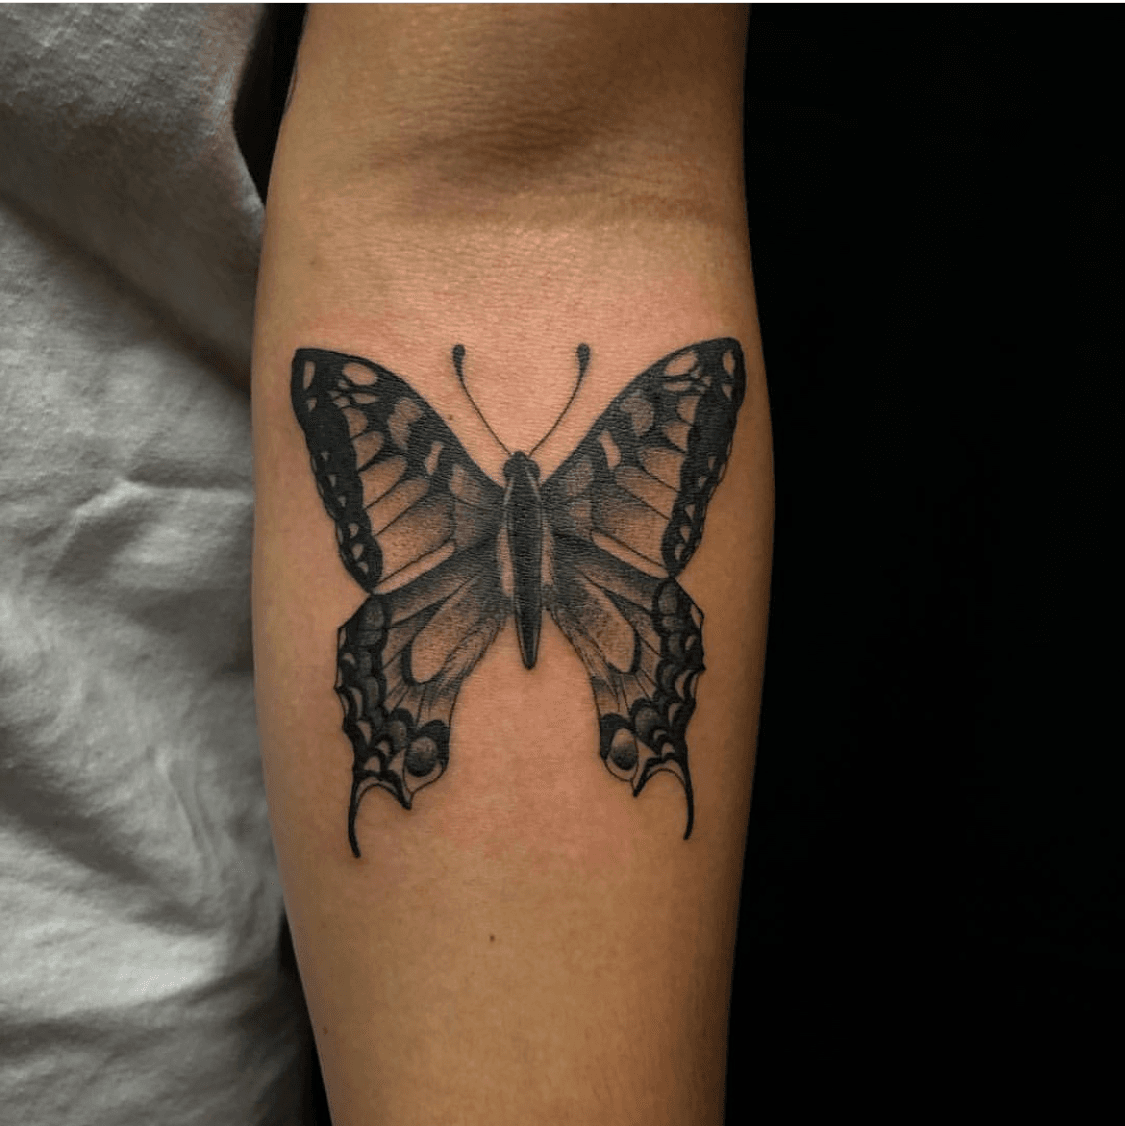 𝐚𝐝𝐫𝐢𝐚 𝐦𝐞𝐫𝐜𝐮𝐫𝐢 on Instagram swallowtail butterfly with frayed  wing for sage  thanks so much for tra  Body art tattoos Meaningful  tattoos Tattoos